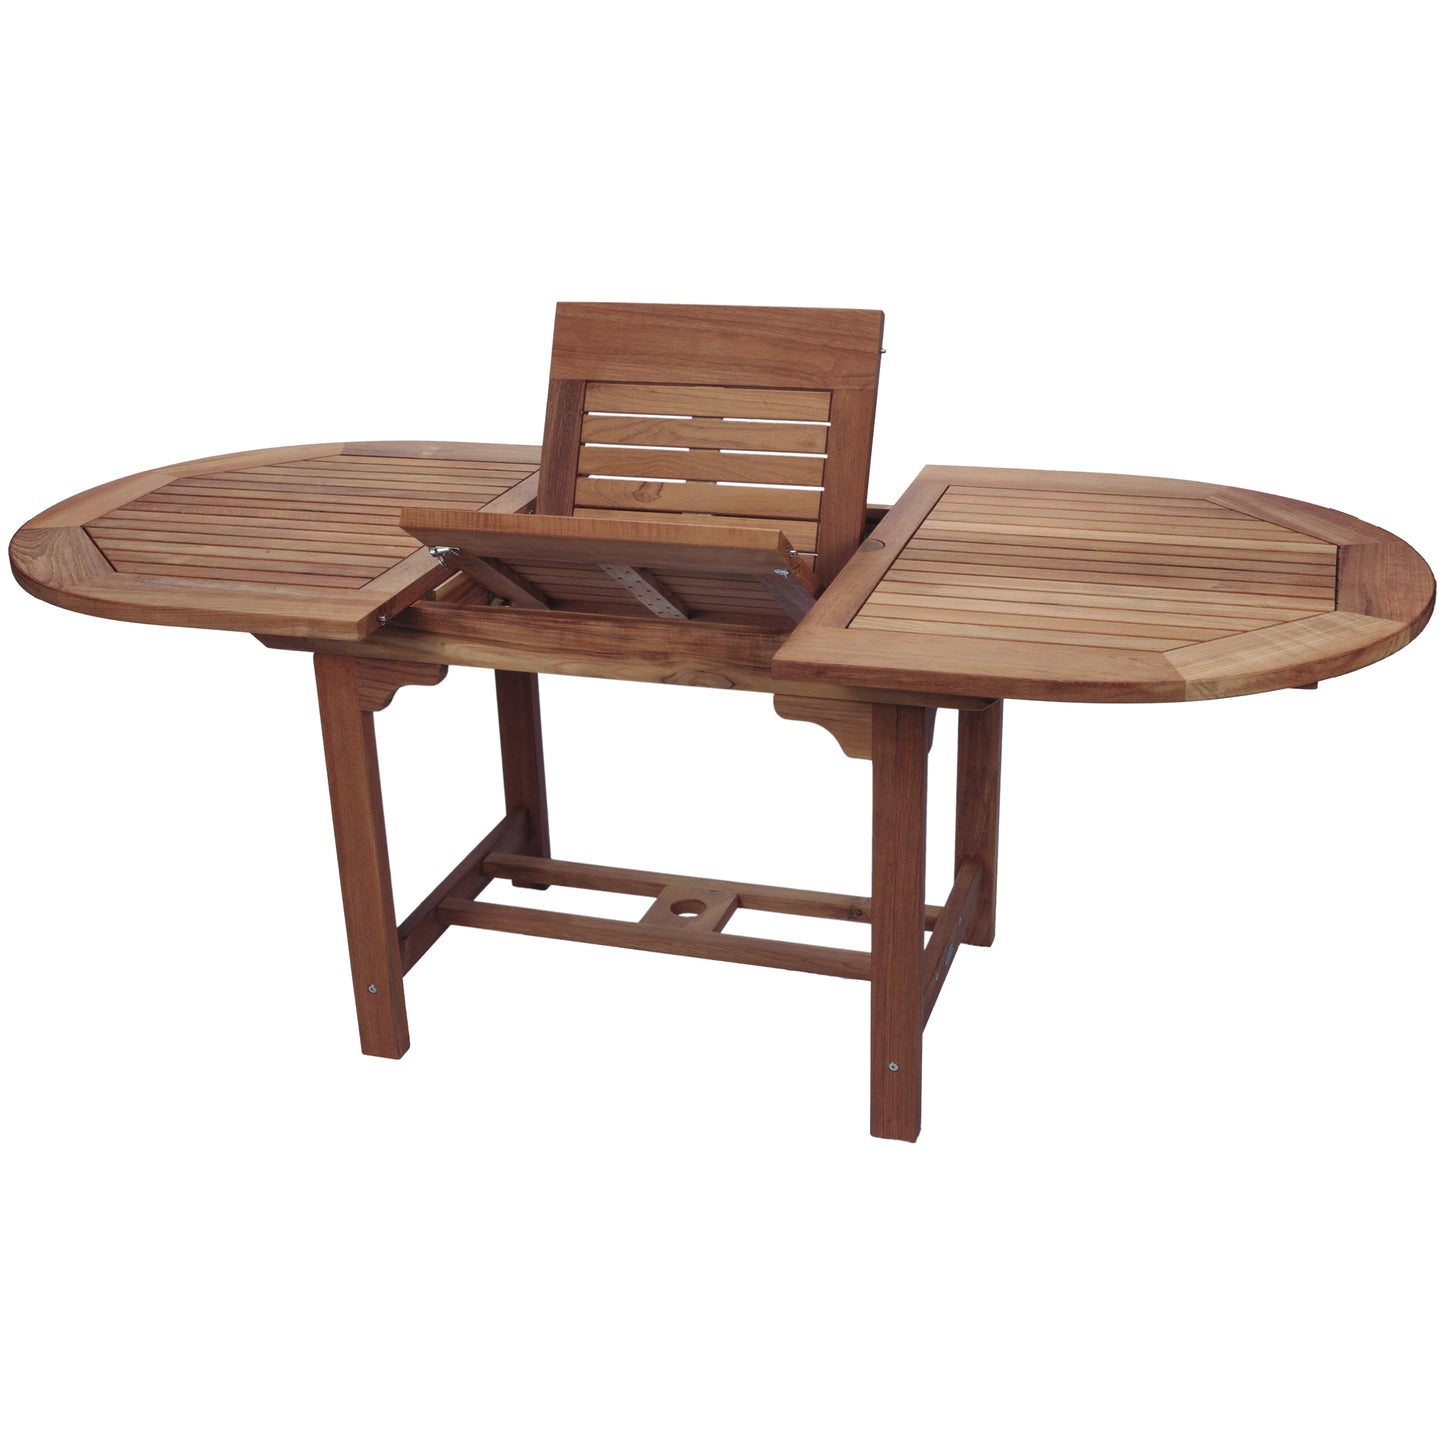 Royal Teak 60"-78" Oval Family Expansion Table with 6 Sailmate Chairs